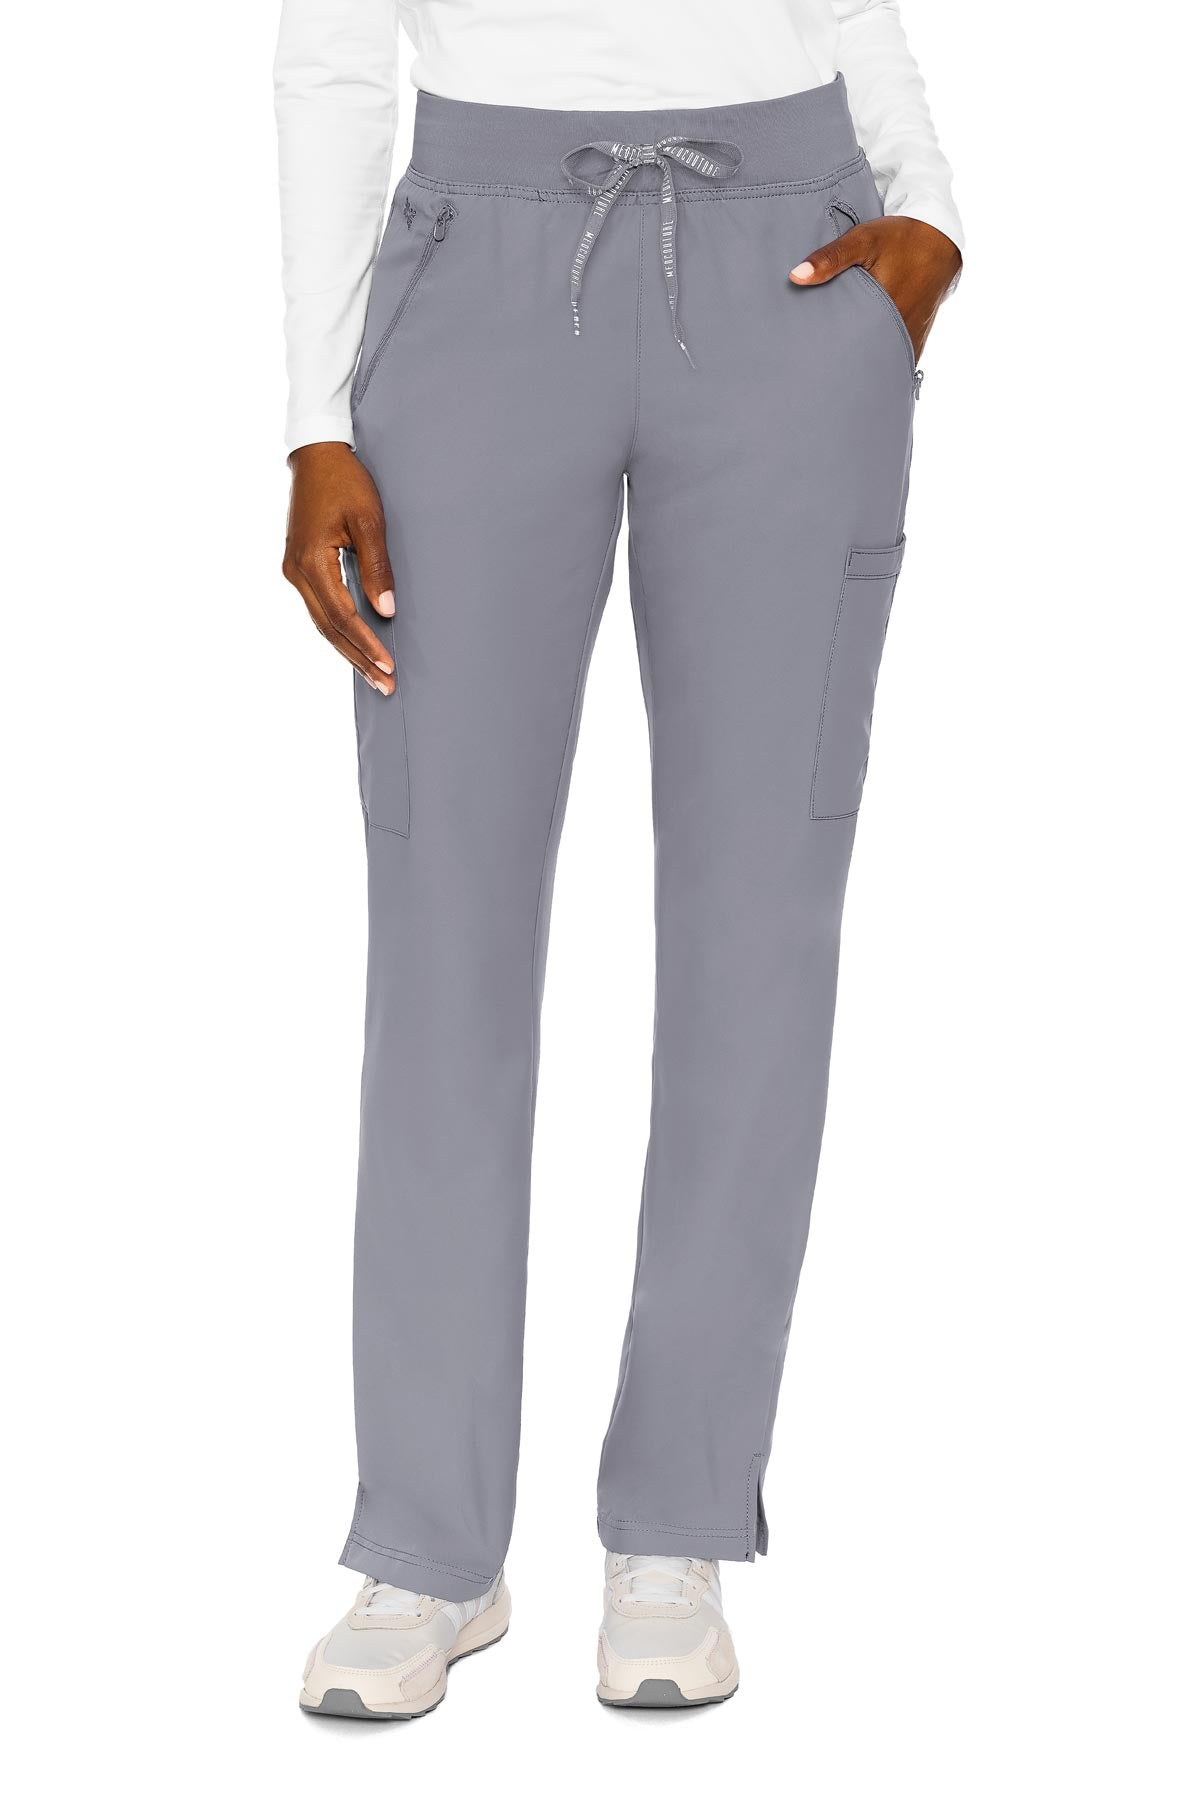 Med Couture Cloud PANT